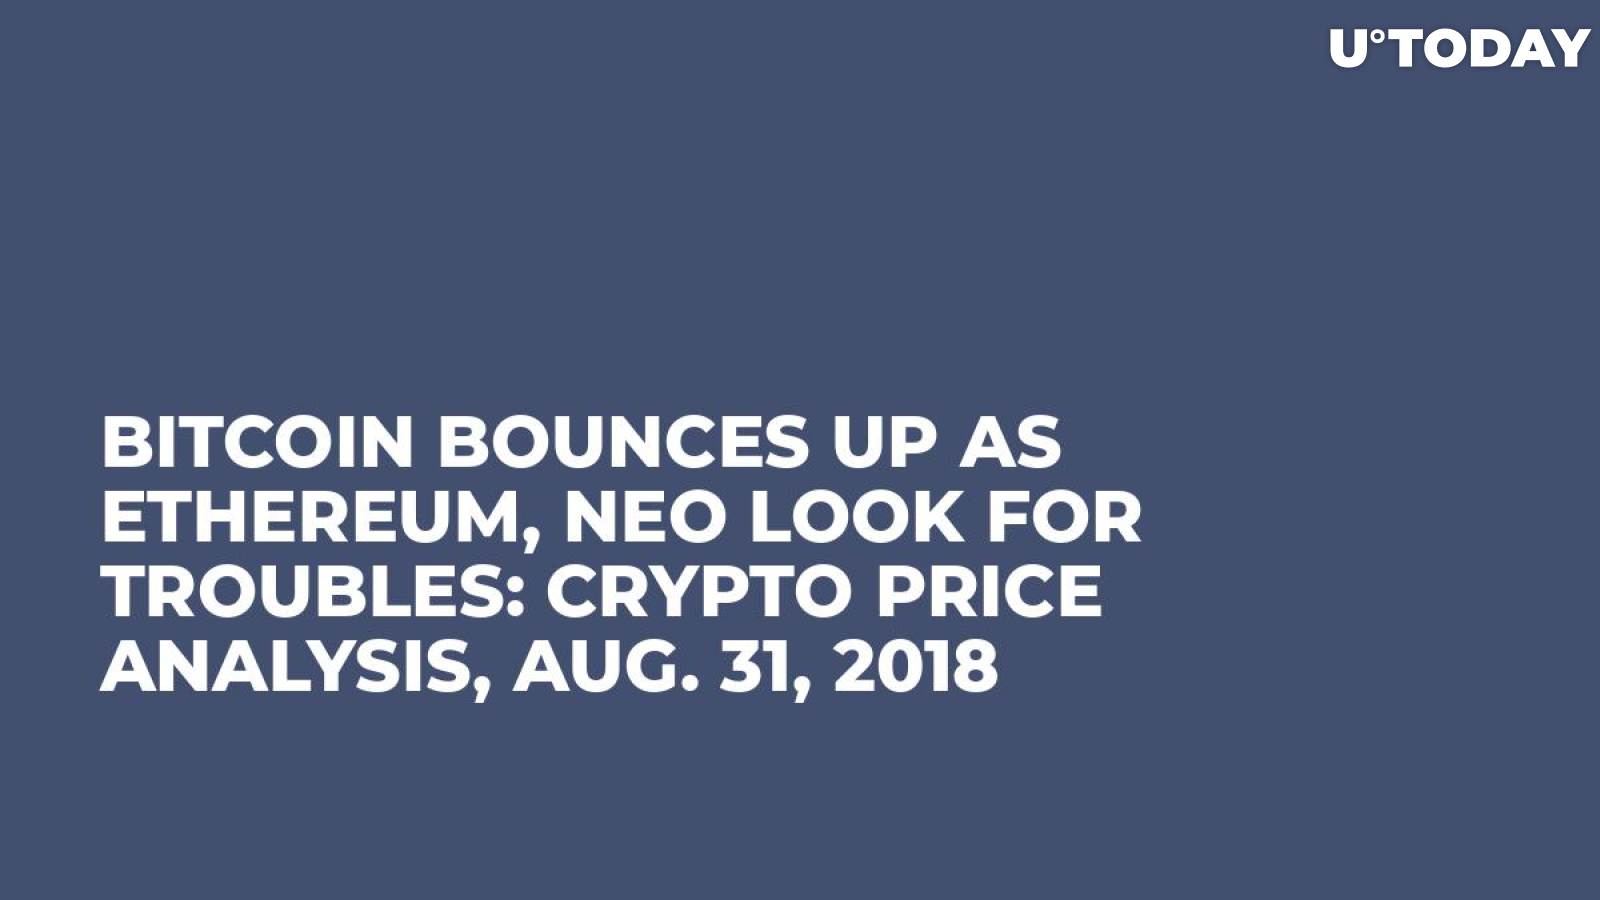 Bitcoin Bounces Up as Ethereum, NEO Look For Troubles: Crypto Price Analysis, Aug. 31, 2018